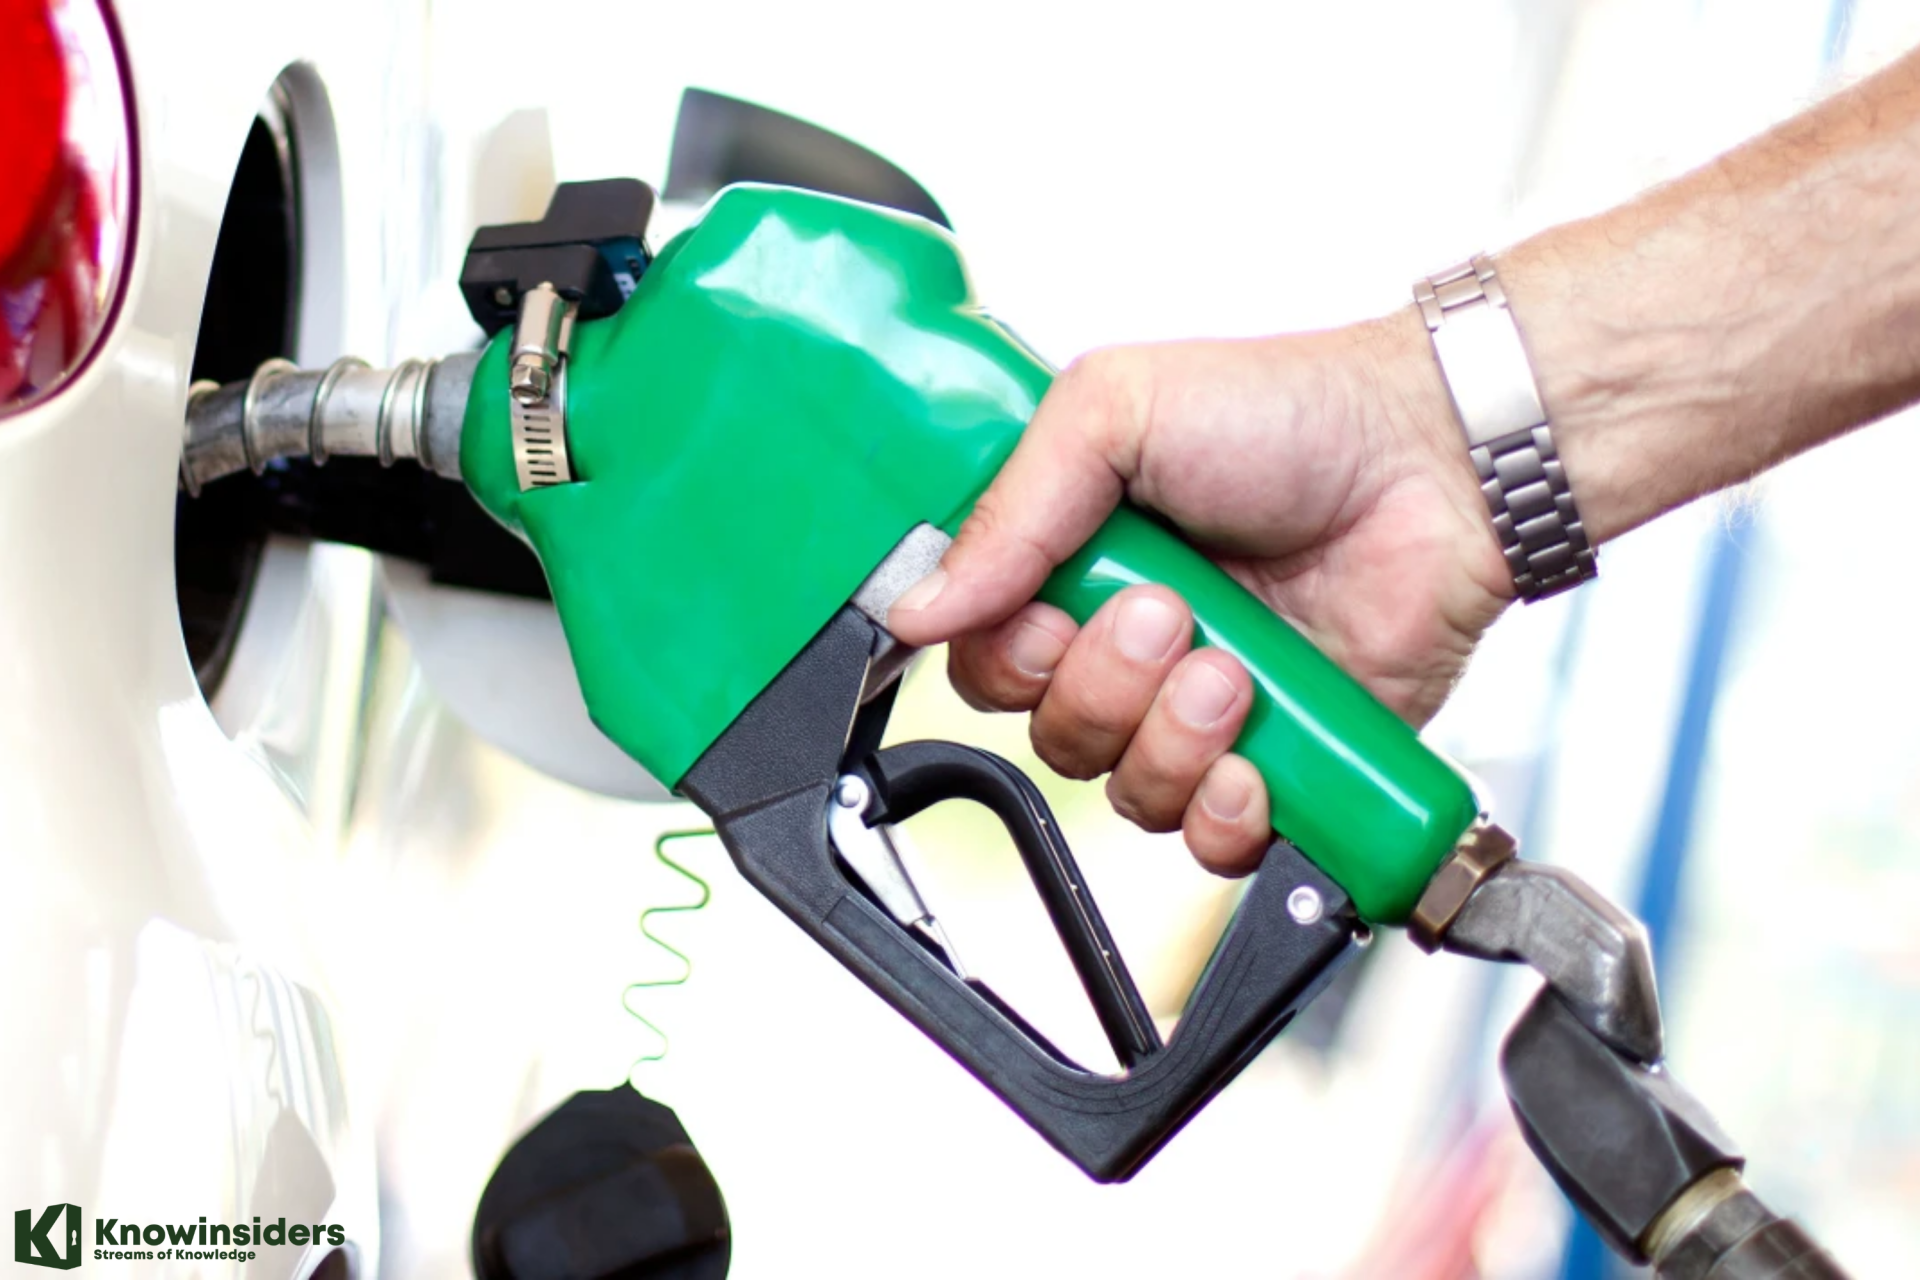 Top 10 Countries With The Cheapest Gas Price & They Are Truly Dreamlands